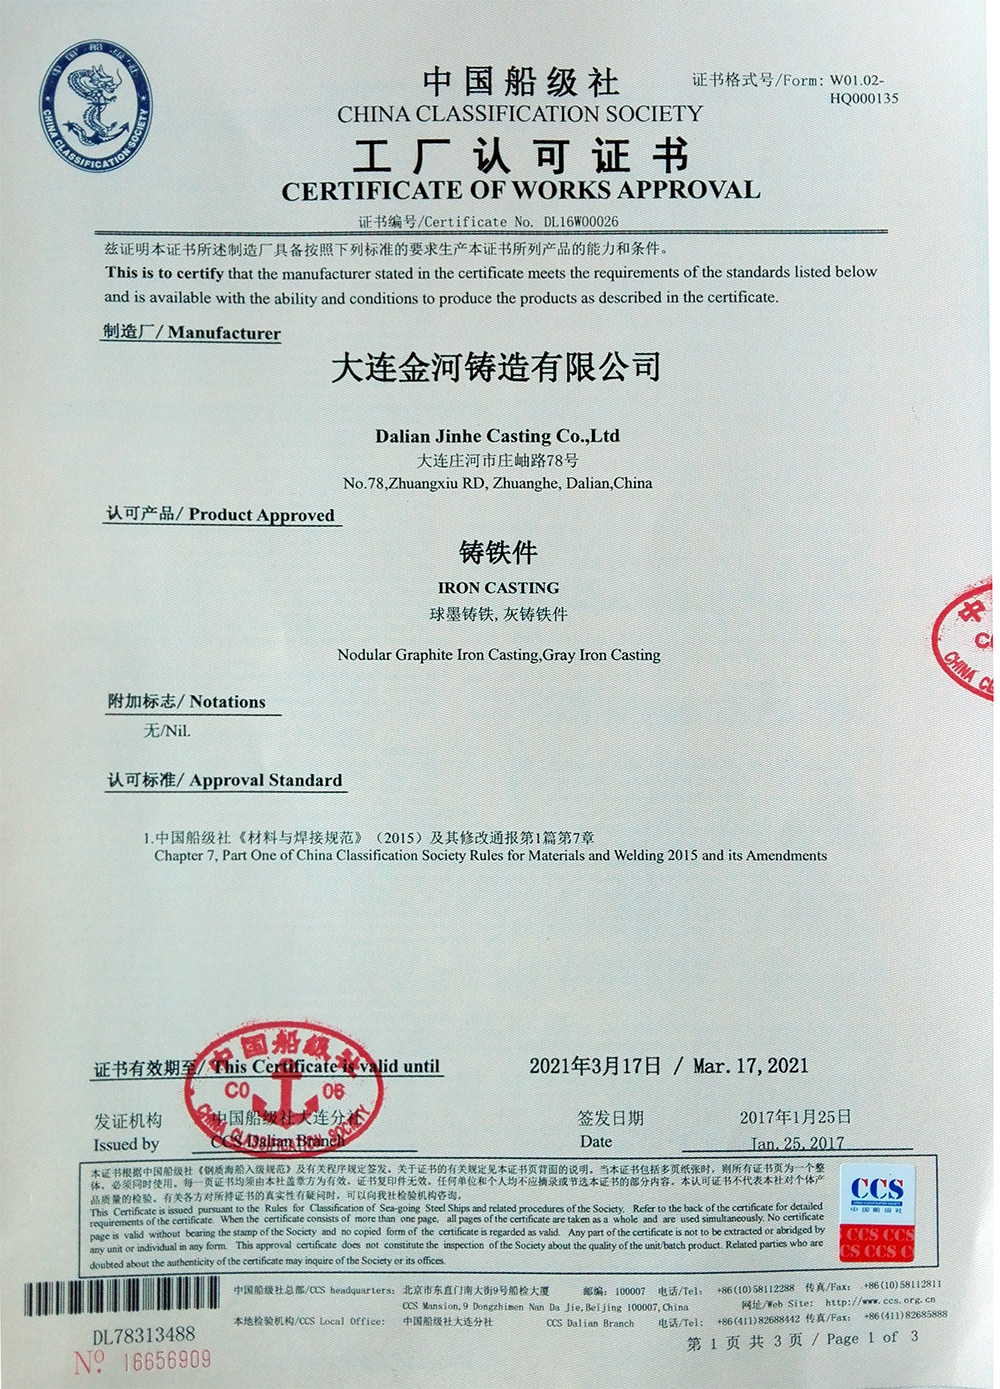 Certificate of China classification society (up to date 2017)